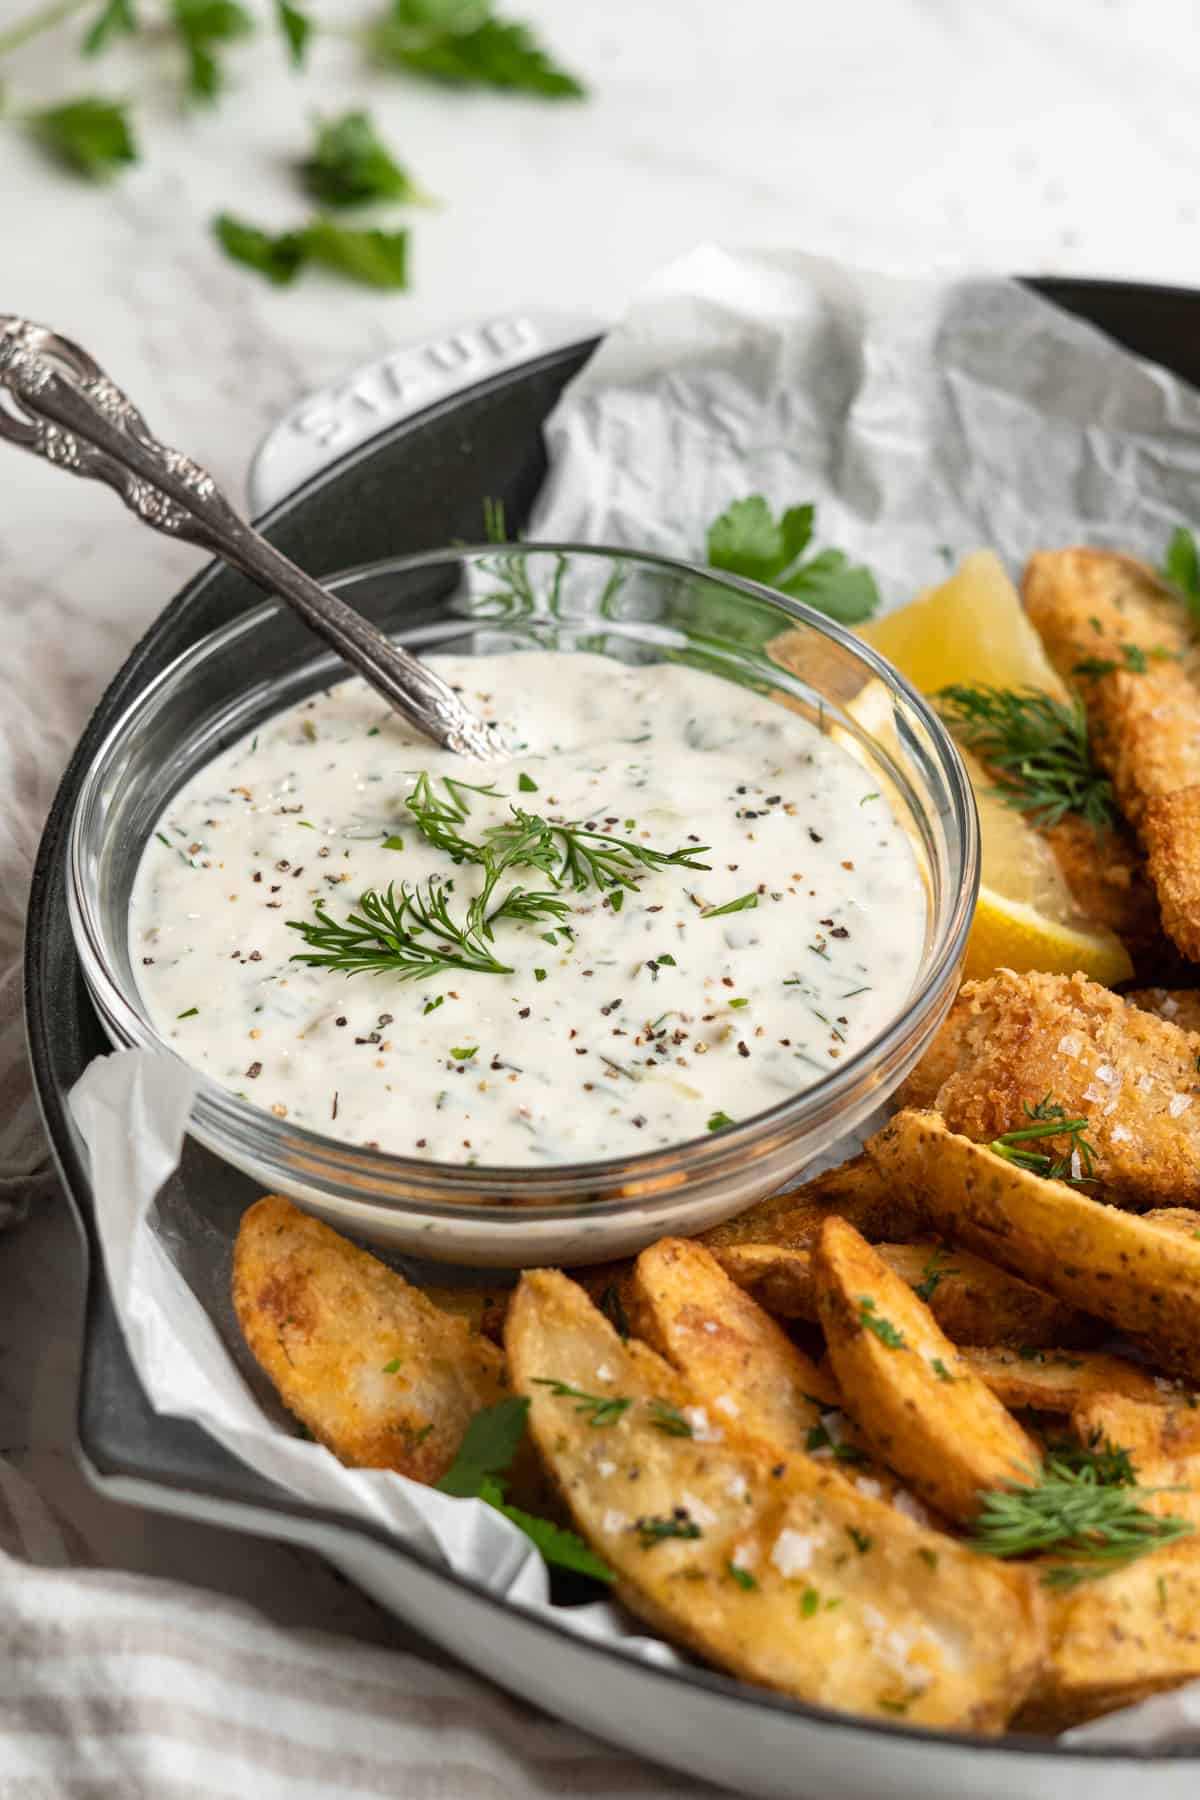 Bowl of tartar sauce garnished with fresh dill on plate of fish and chips